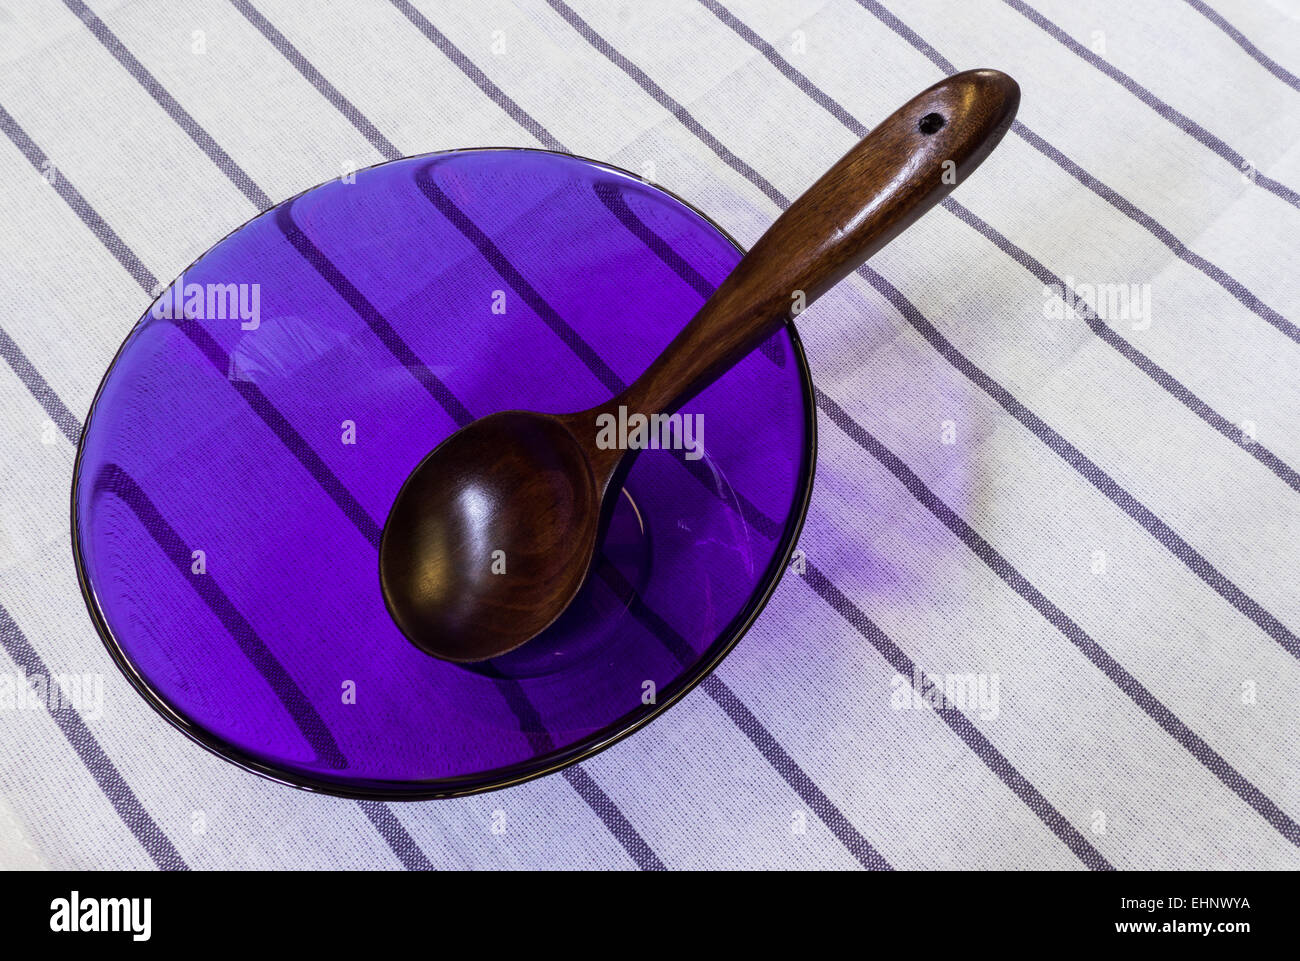 Wooden Spoon in Light Purple Cooking Glass Bowl Placed on White Table Background Stock Photo